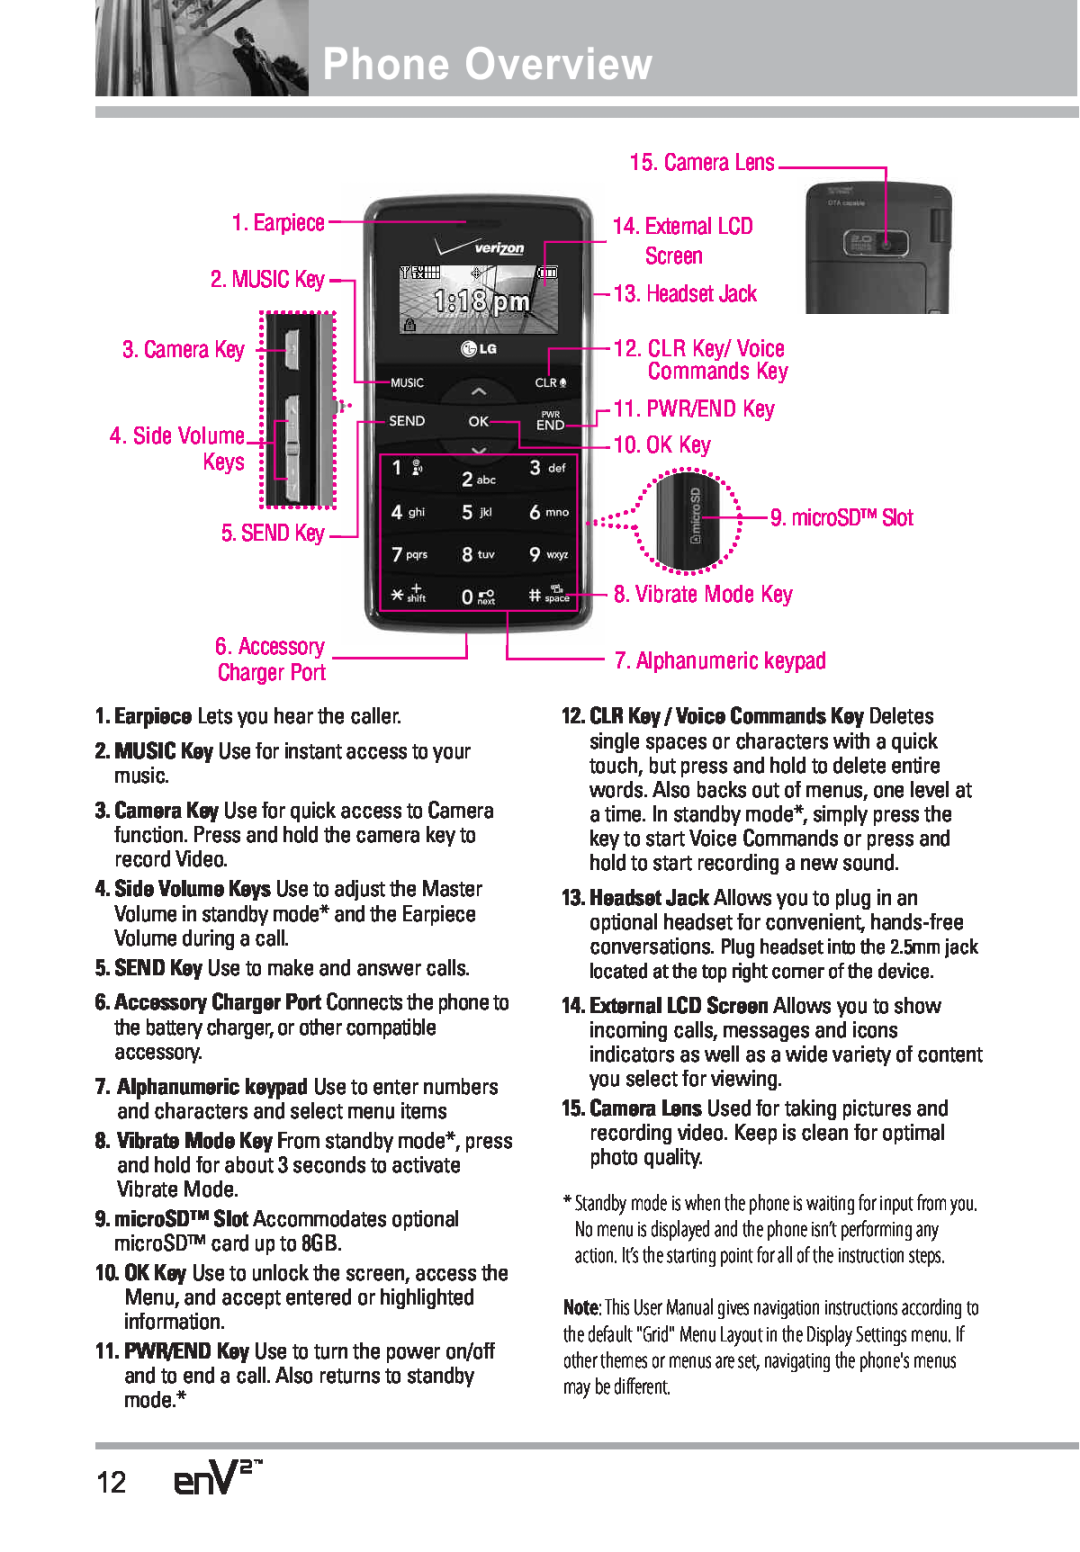 LG Electronics EnV2 manual Phone Overview, microSD Slot Accommodates optional microSD card up to 8GB 